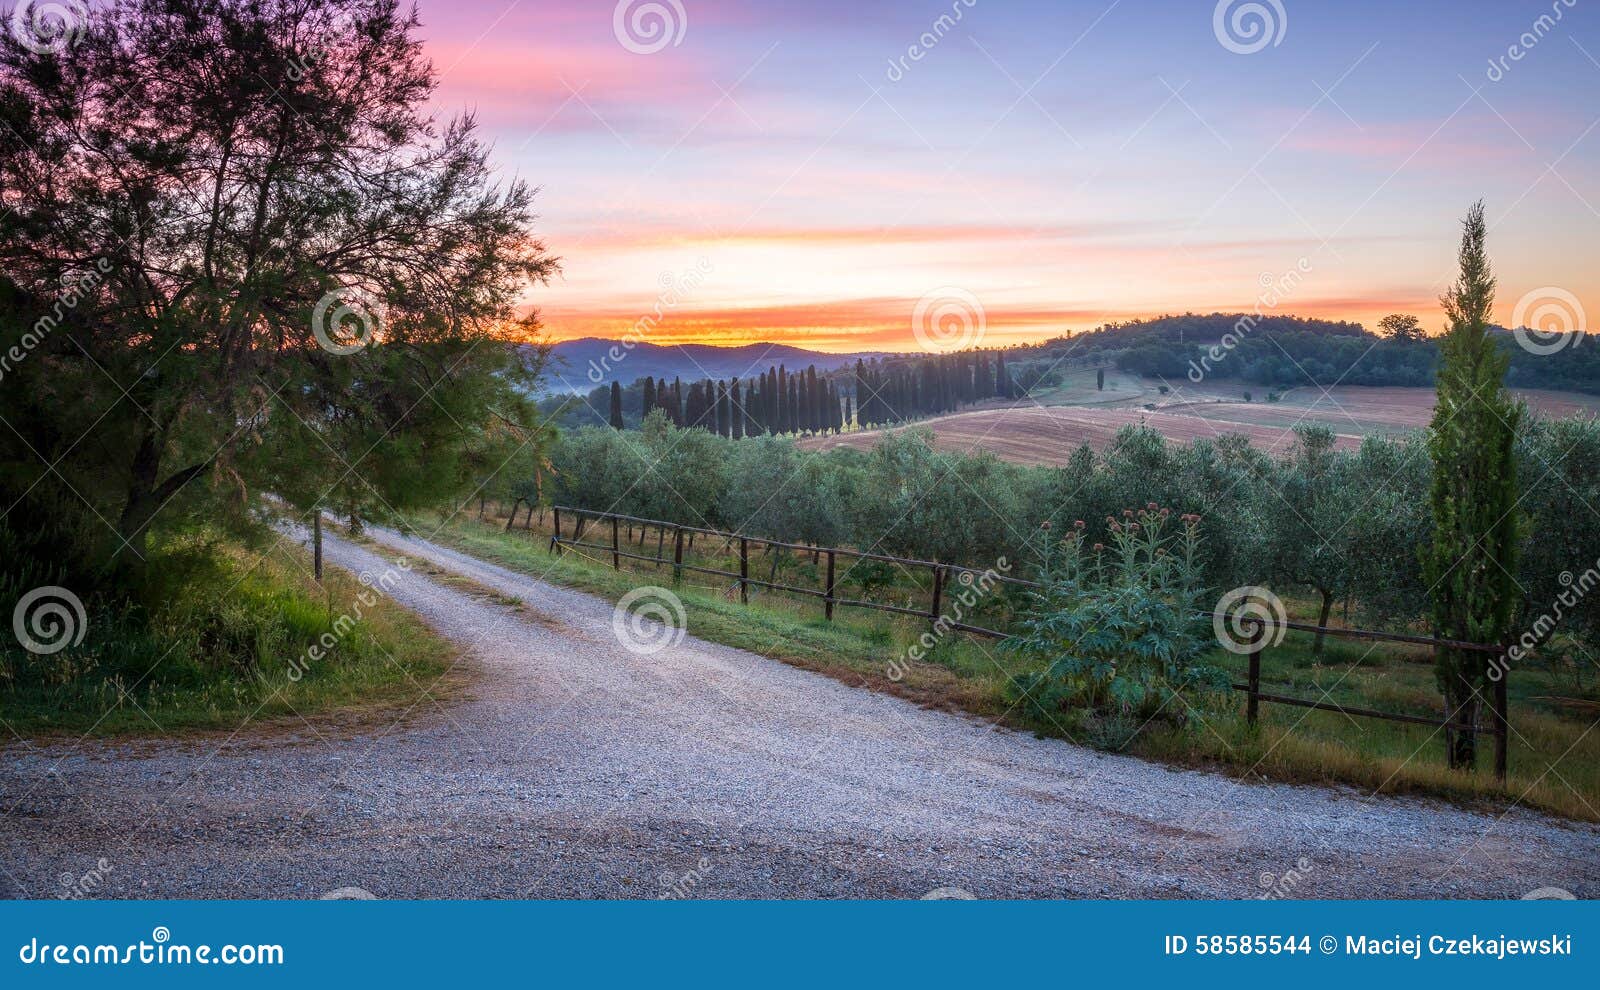 countryside landscape in tuscany